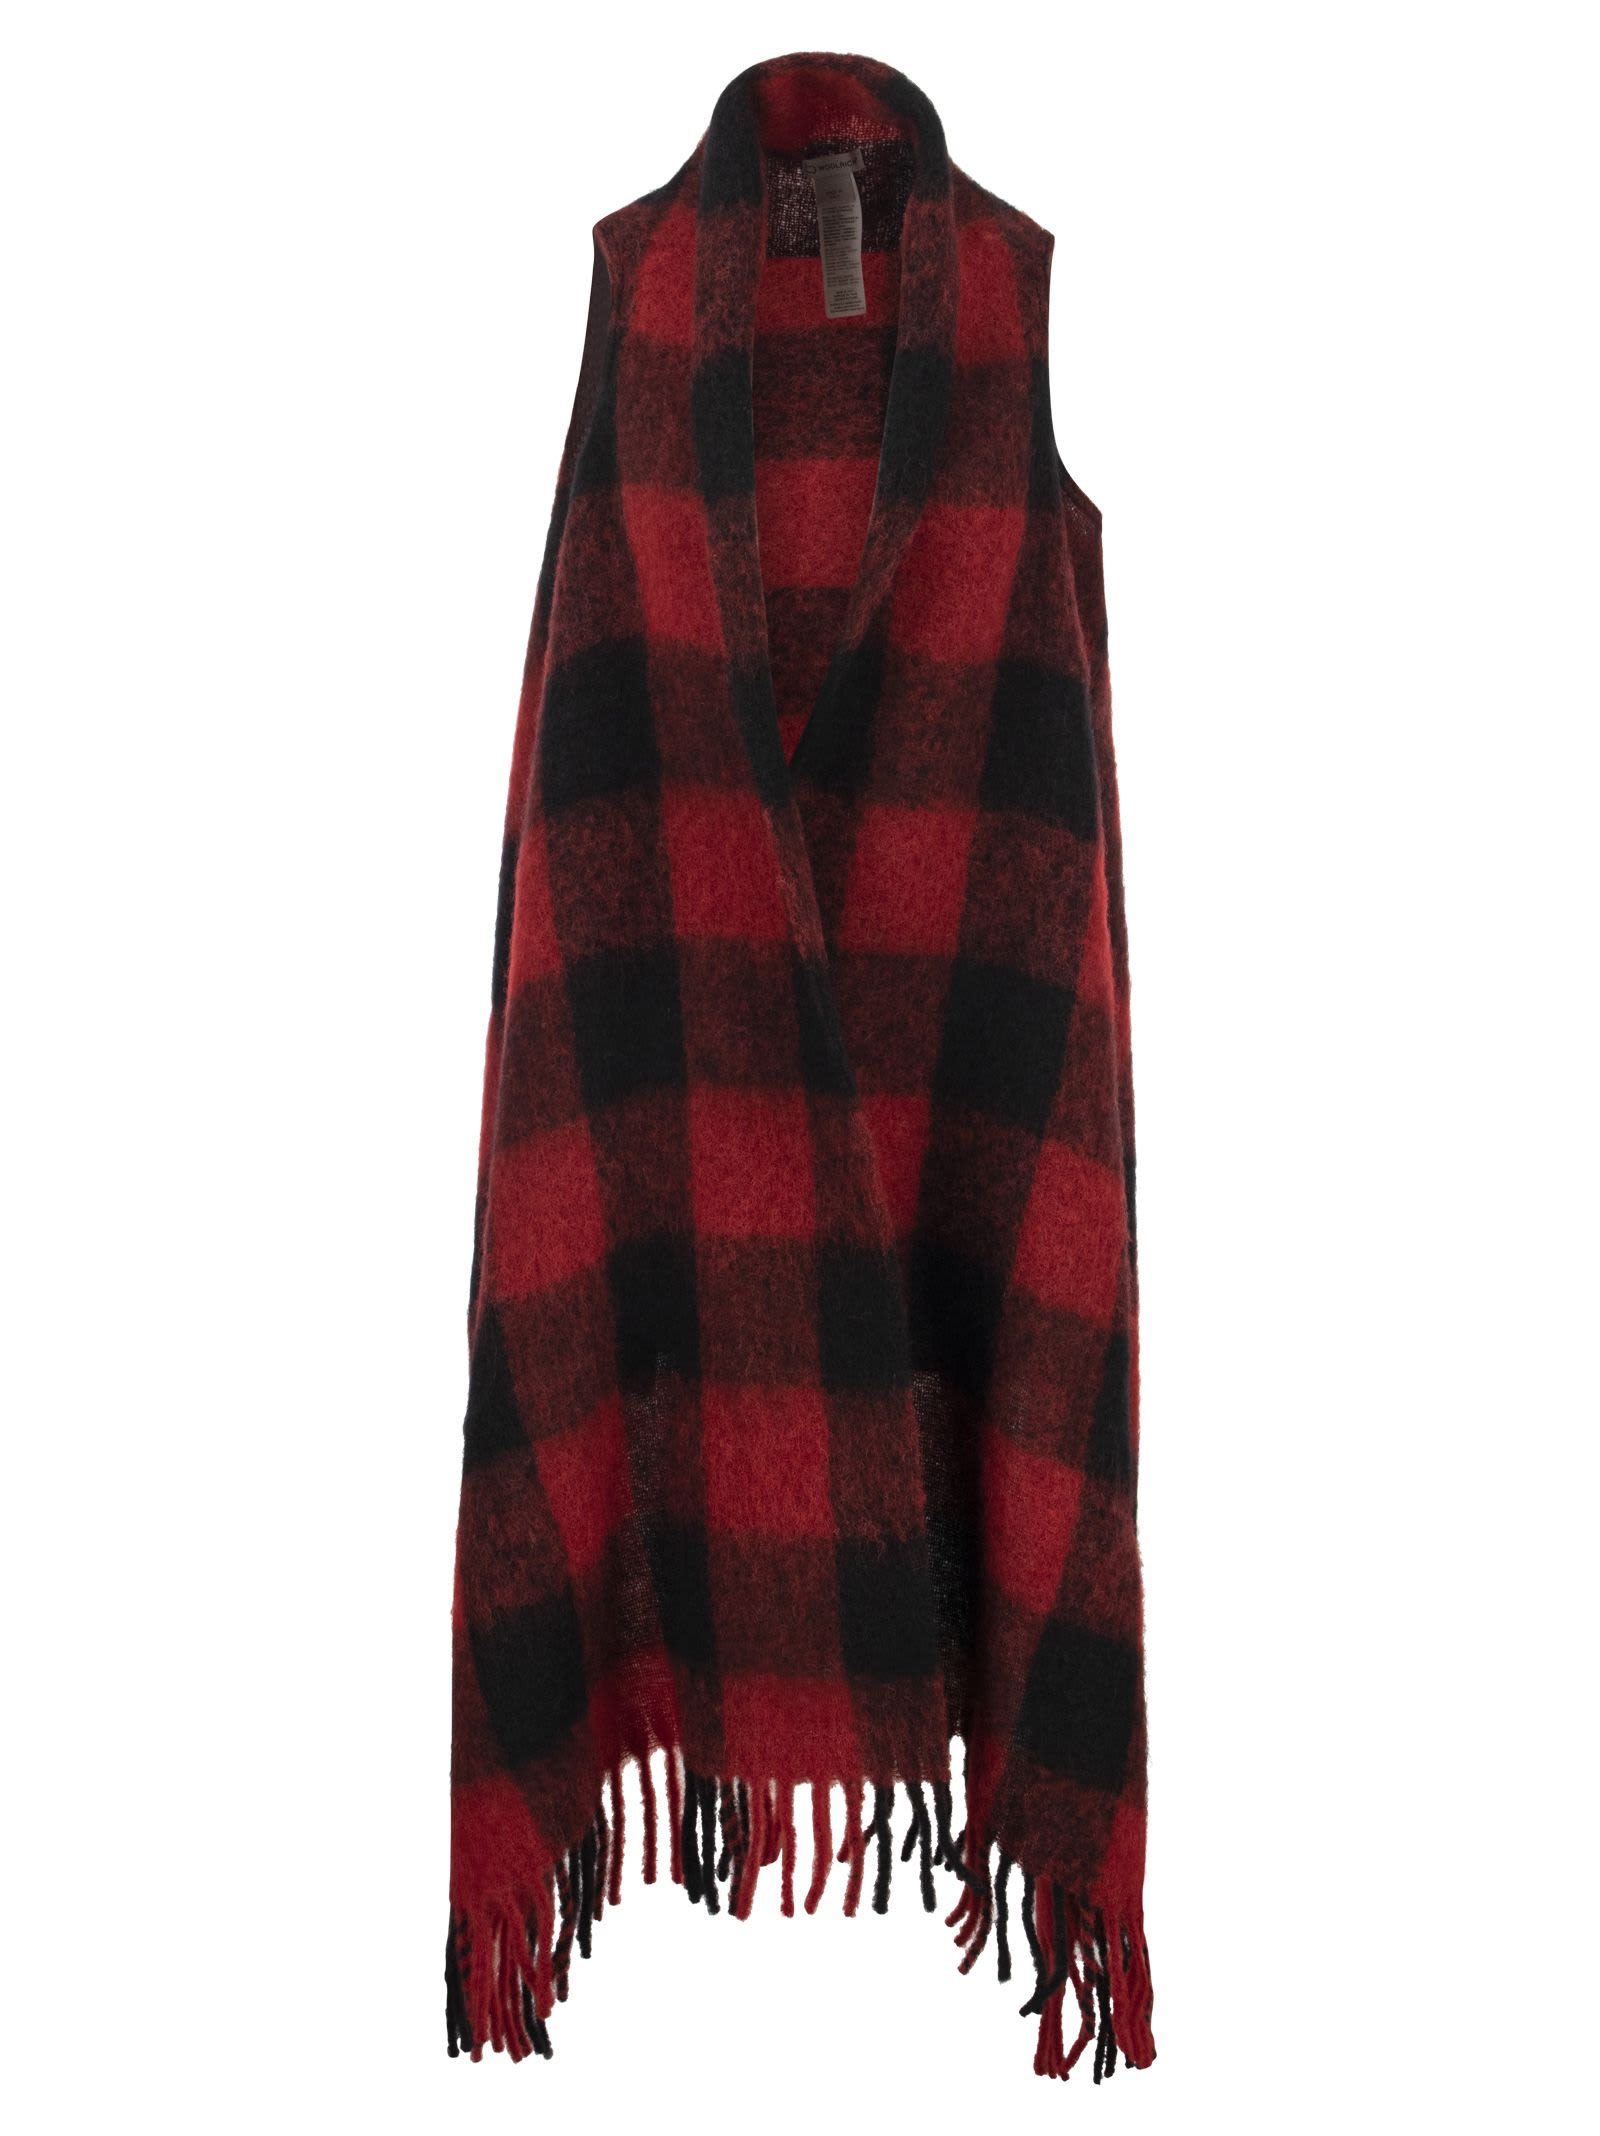 WOOLRICH PLAID PATTERNED CAPE SCARF